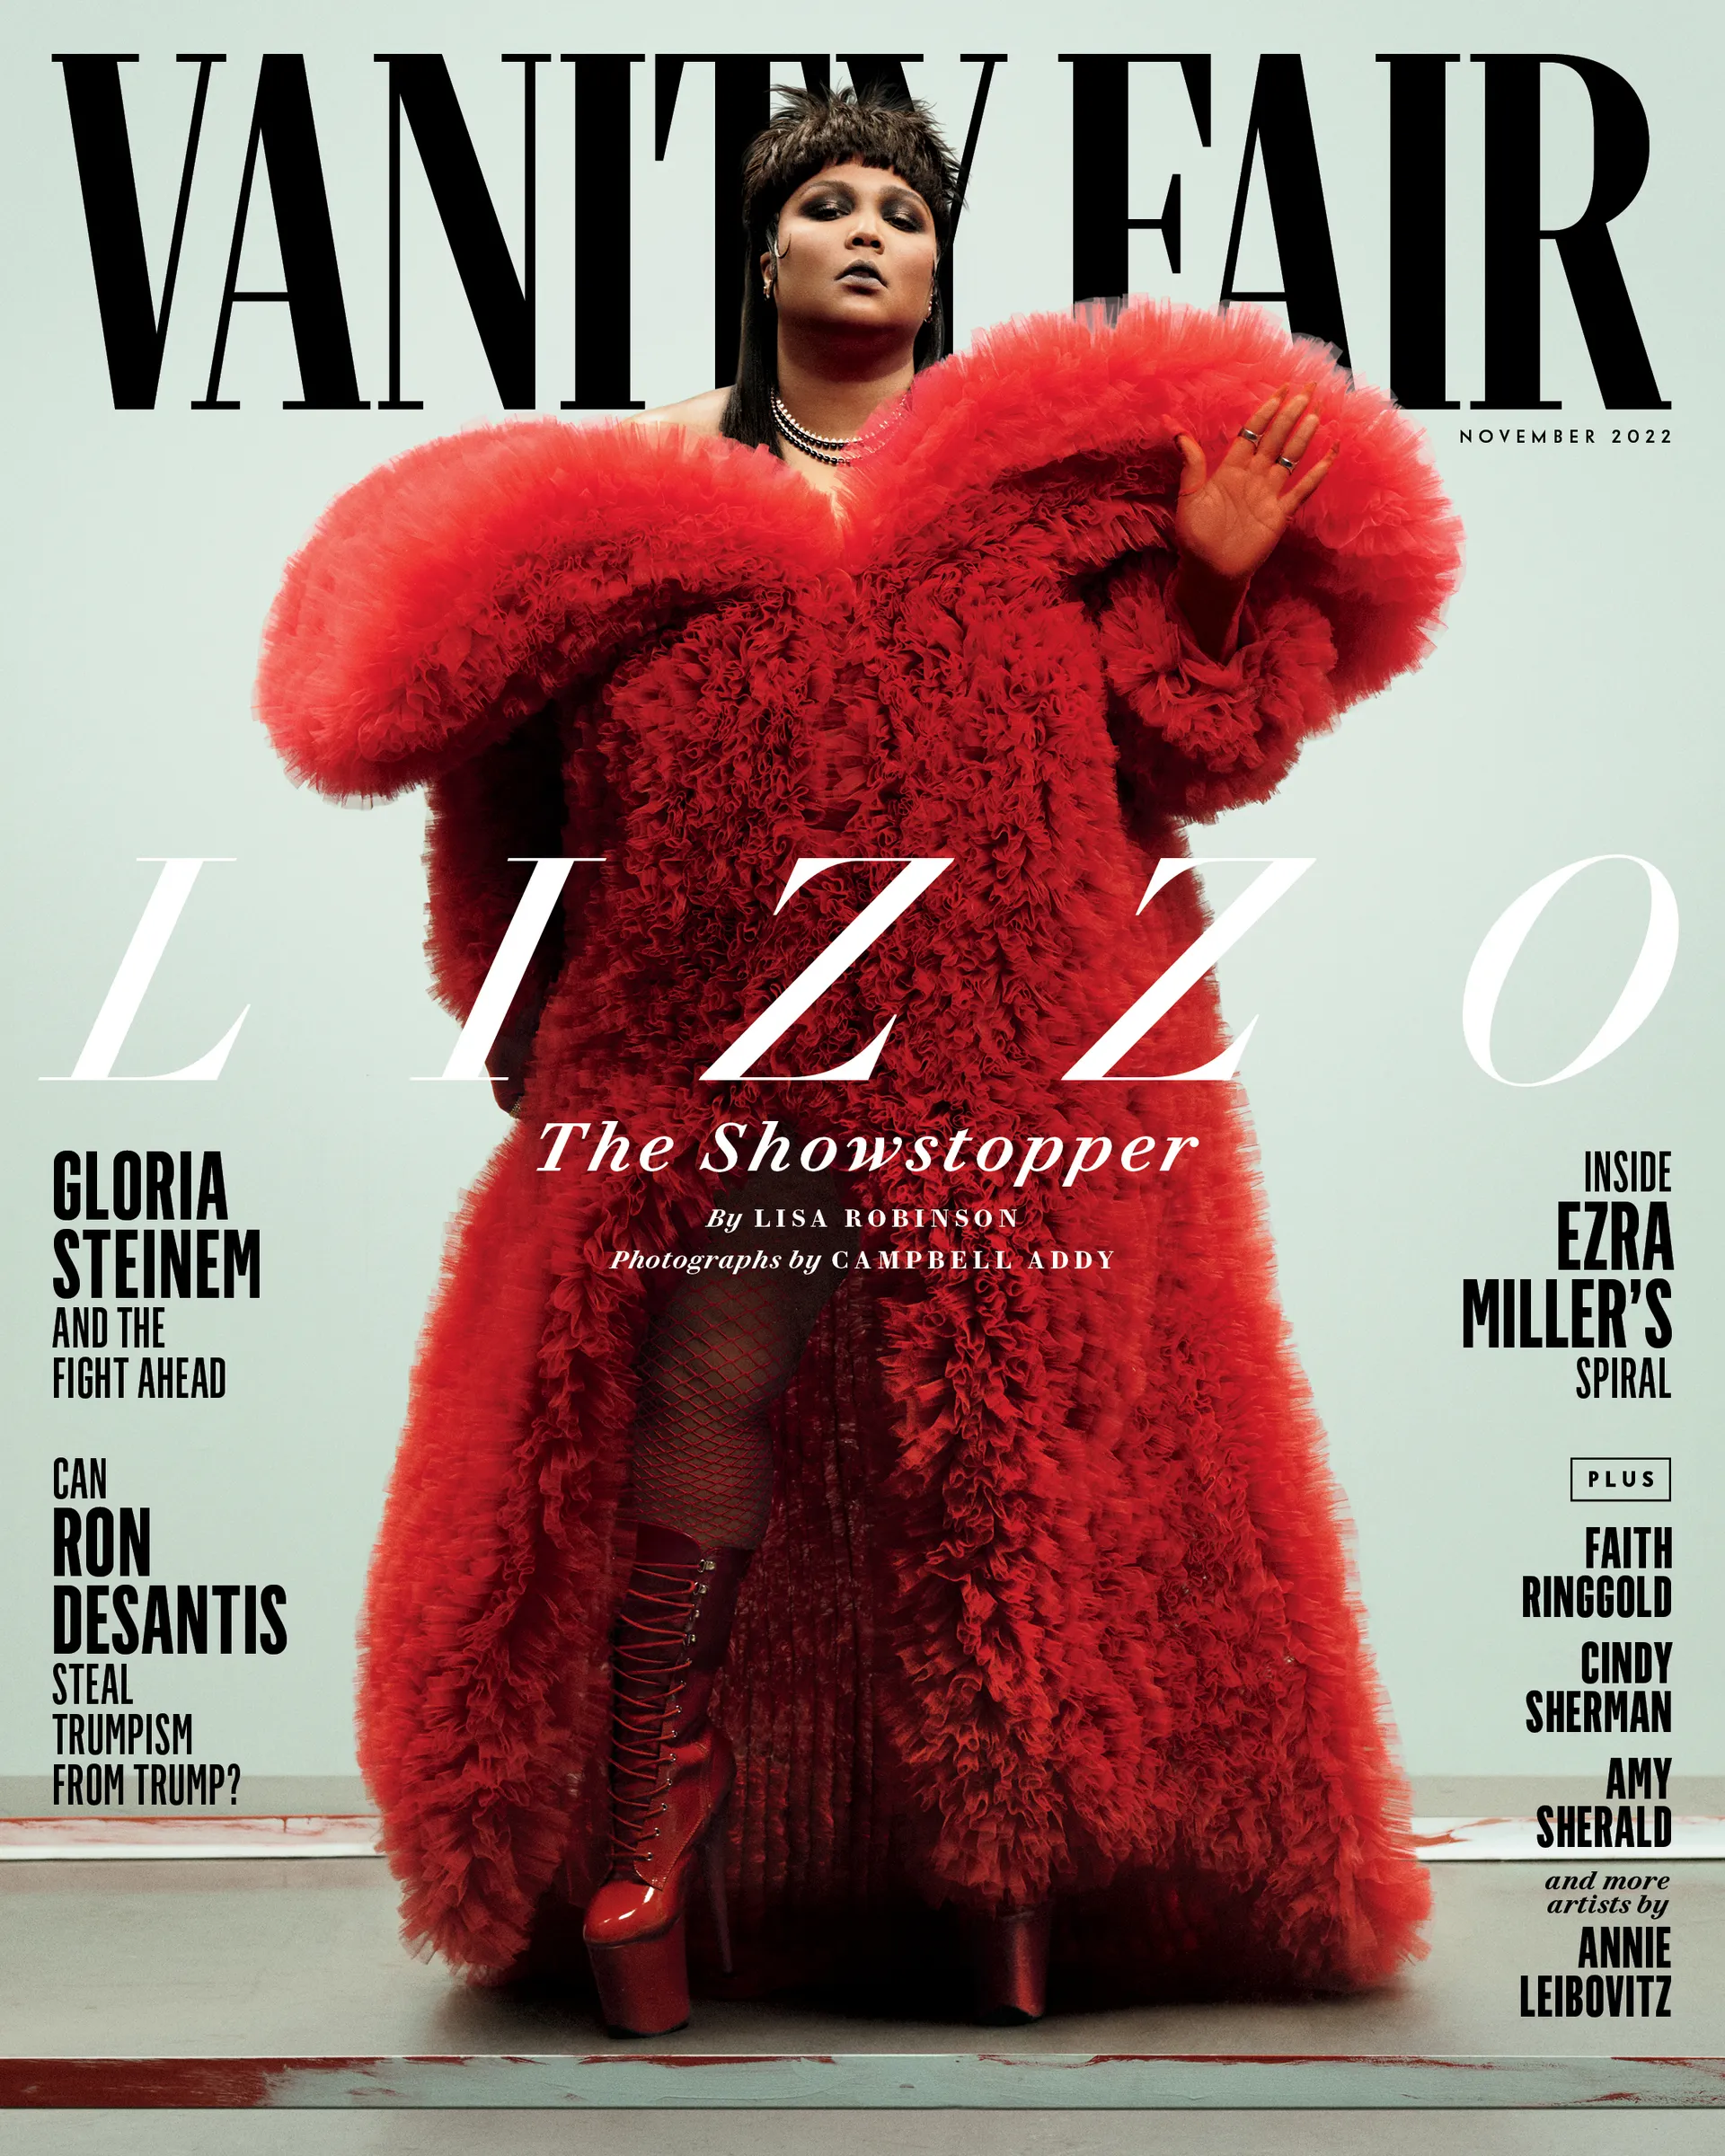 Lizzo on Hope, Justice, and the Election